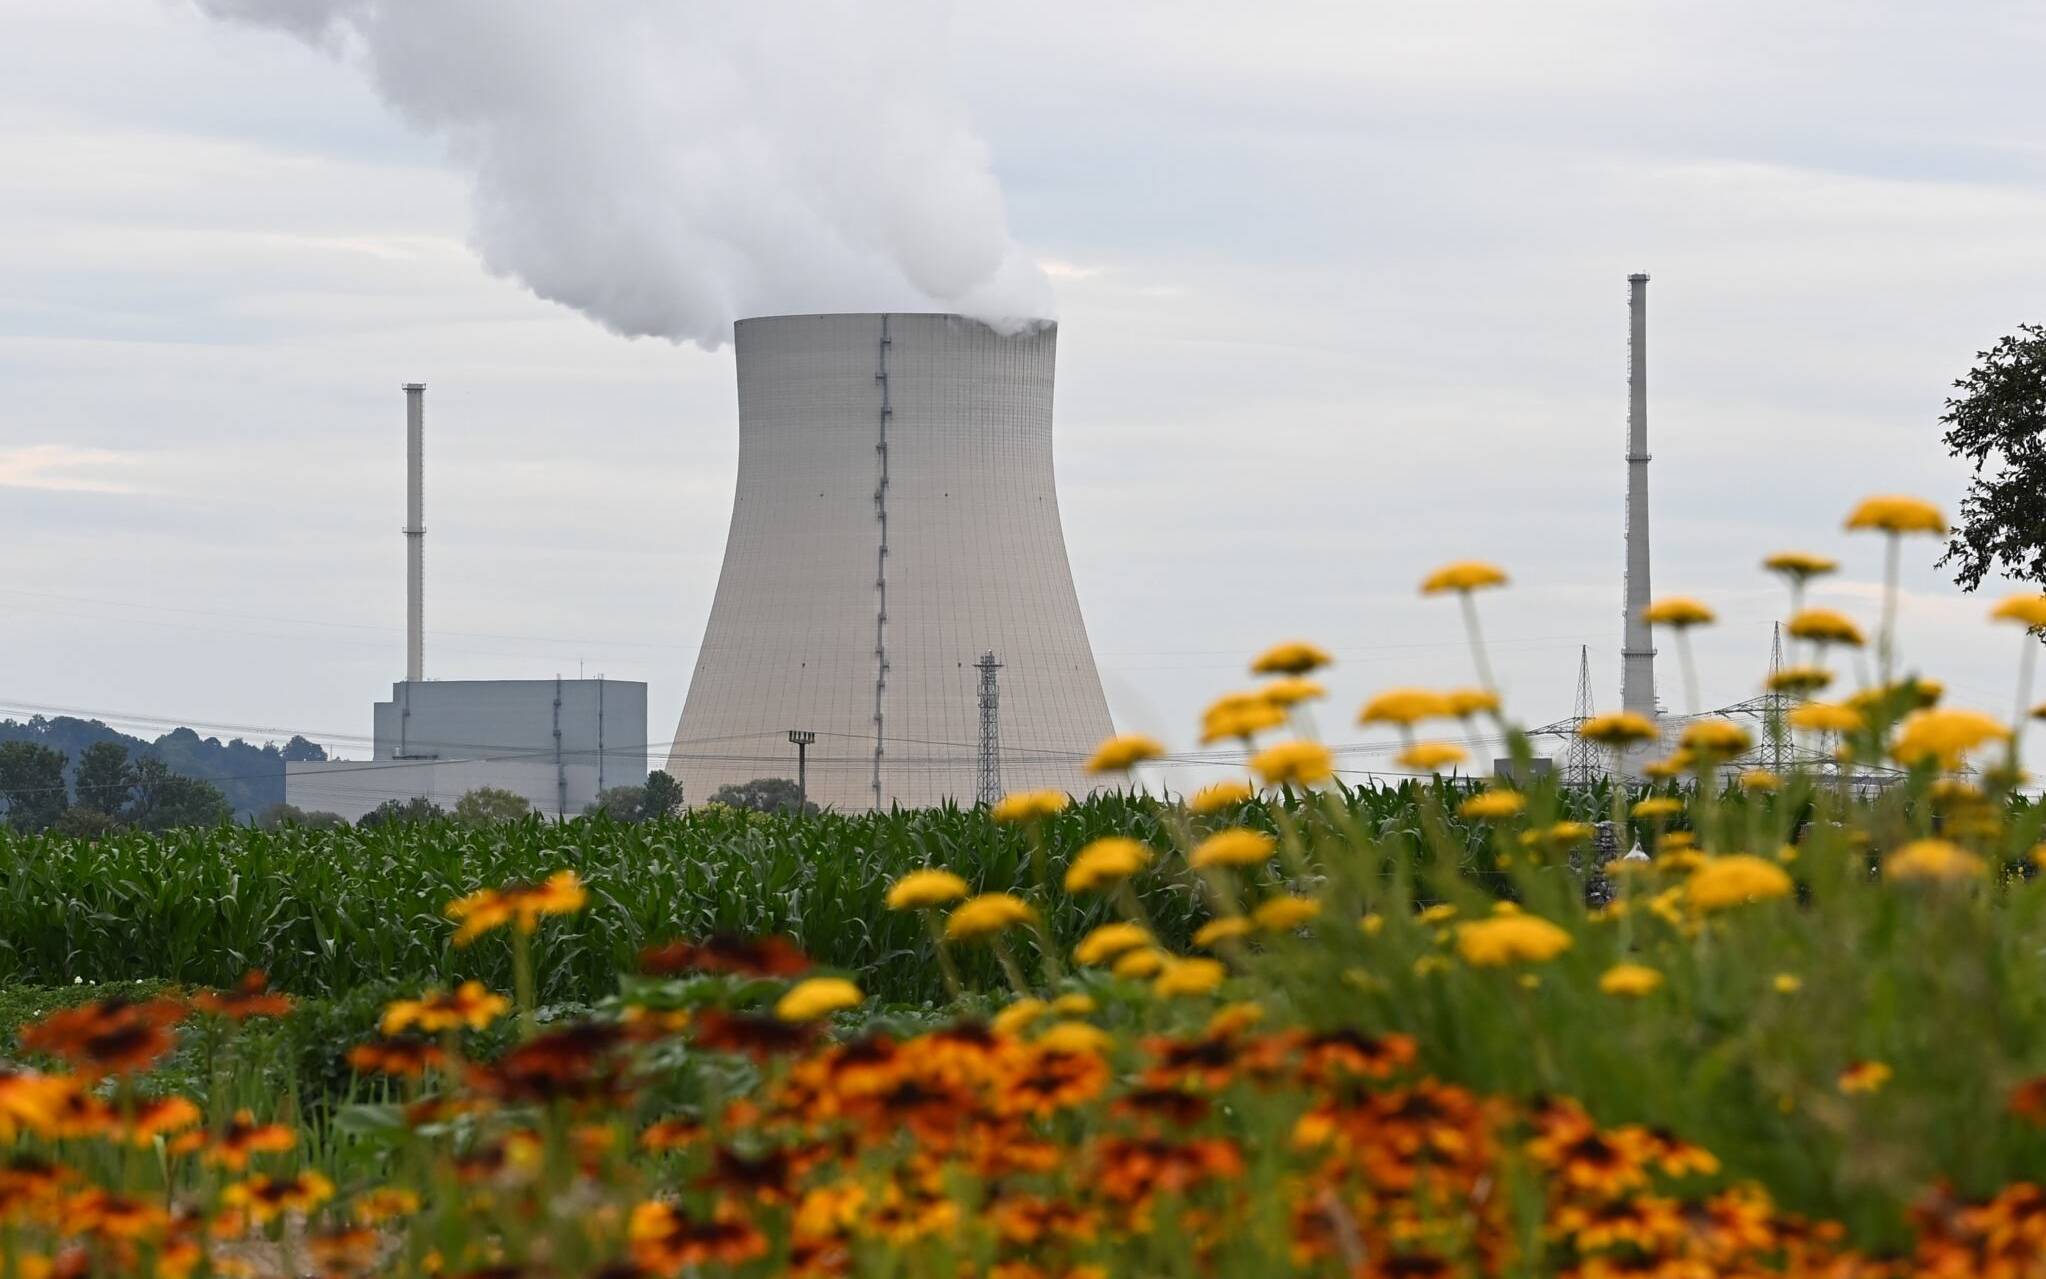 The Isar Nuclear Power Plant with steam rising from its cooling tower is seen behind flowers and a field in Essenbach, near Landshut, southern Germany, on July 7, 2022. (Photo by Christof STACHE / AFP)